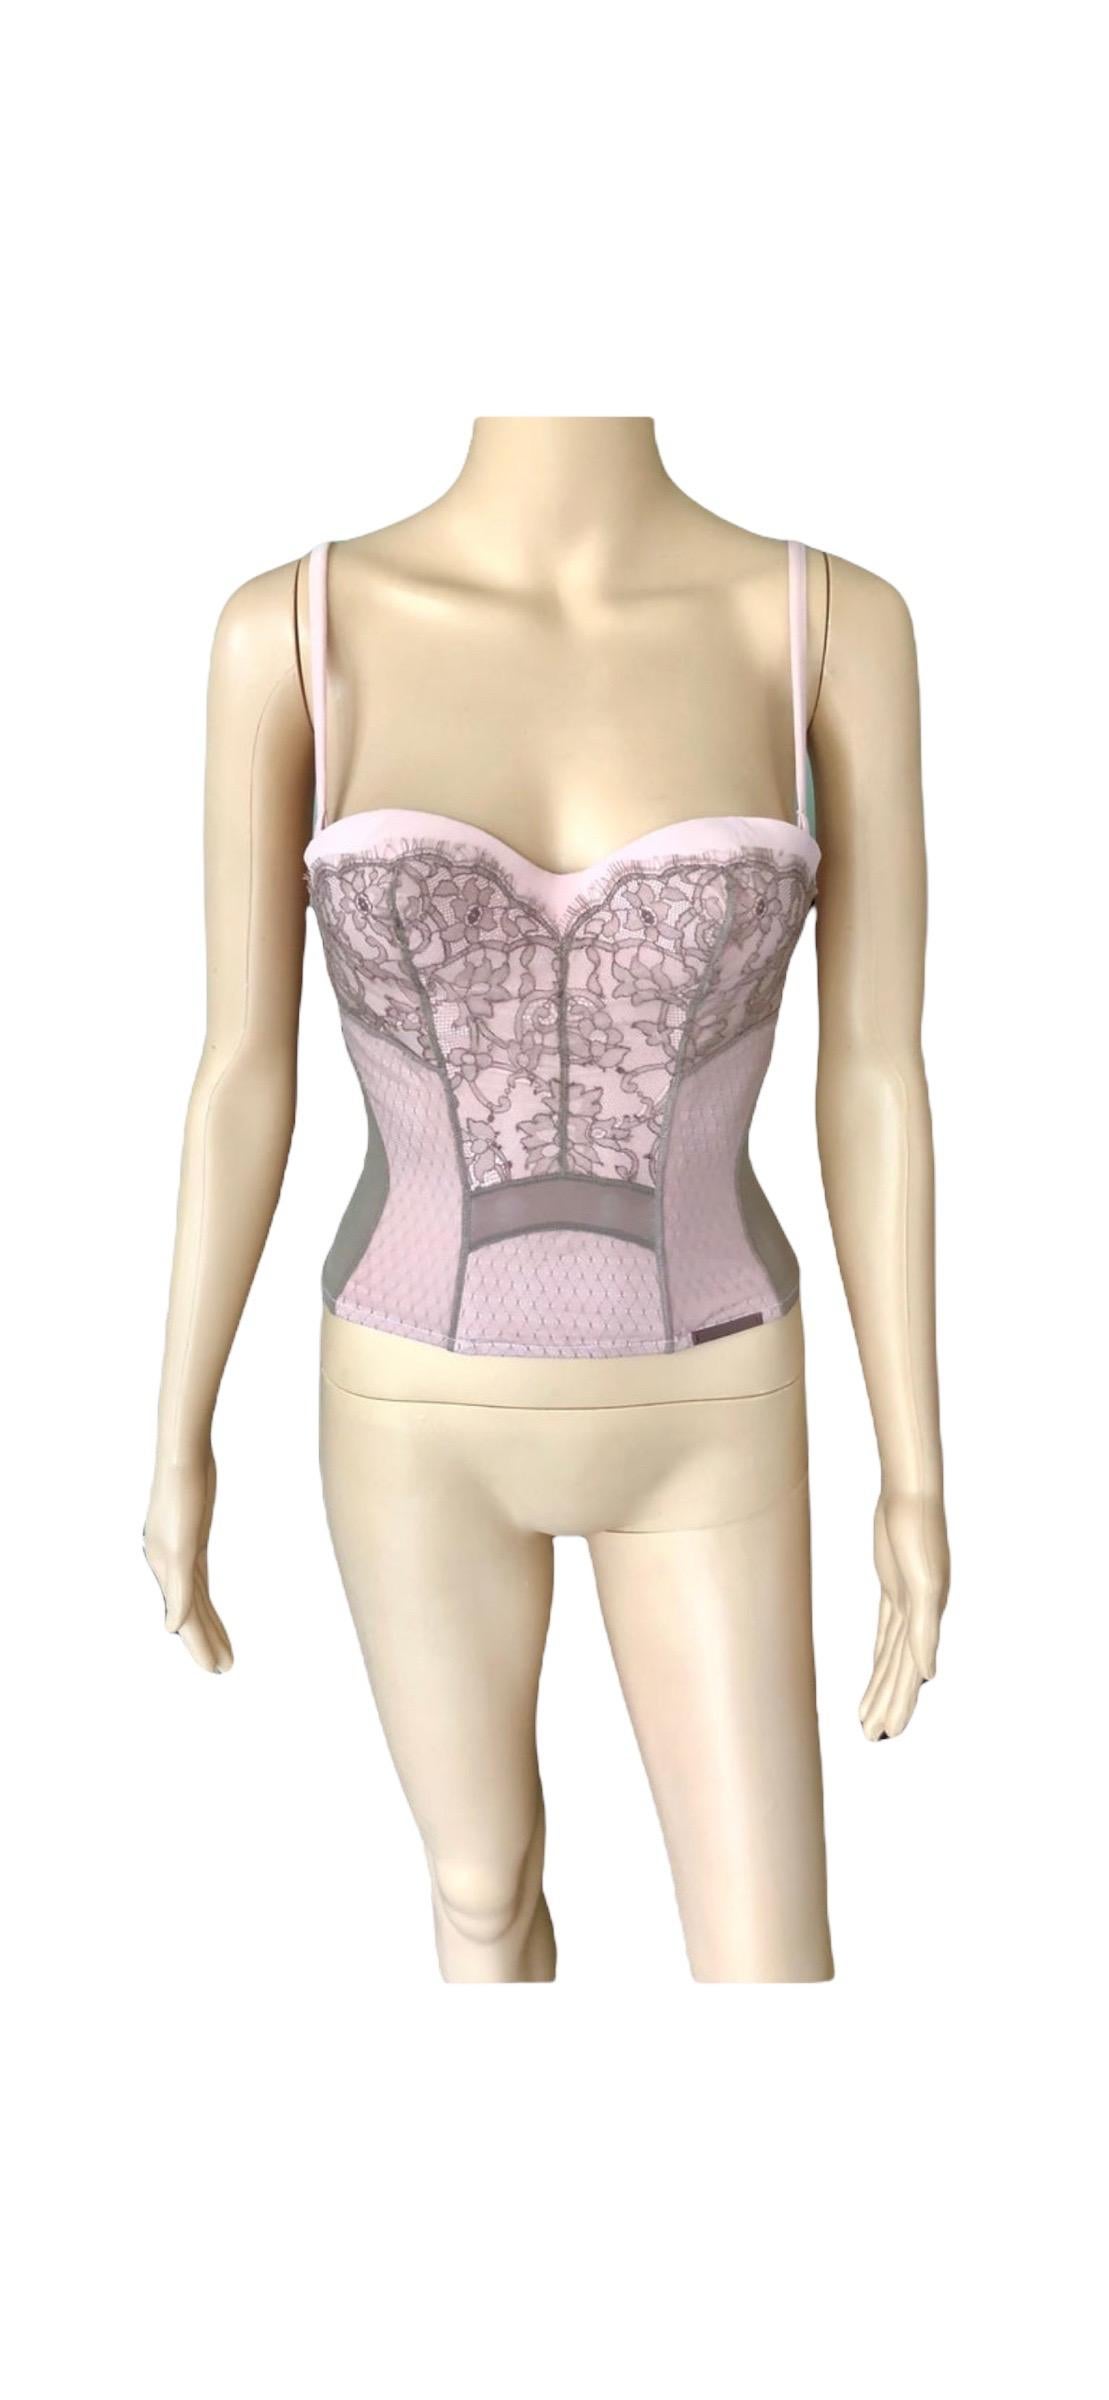 Christian Dior By John Galliano S/S 2006 Unworn Bustier Lace Corset Crop Top For Sale 4